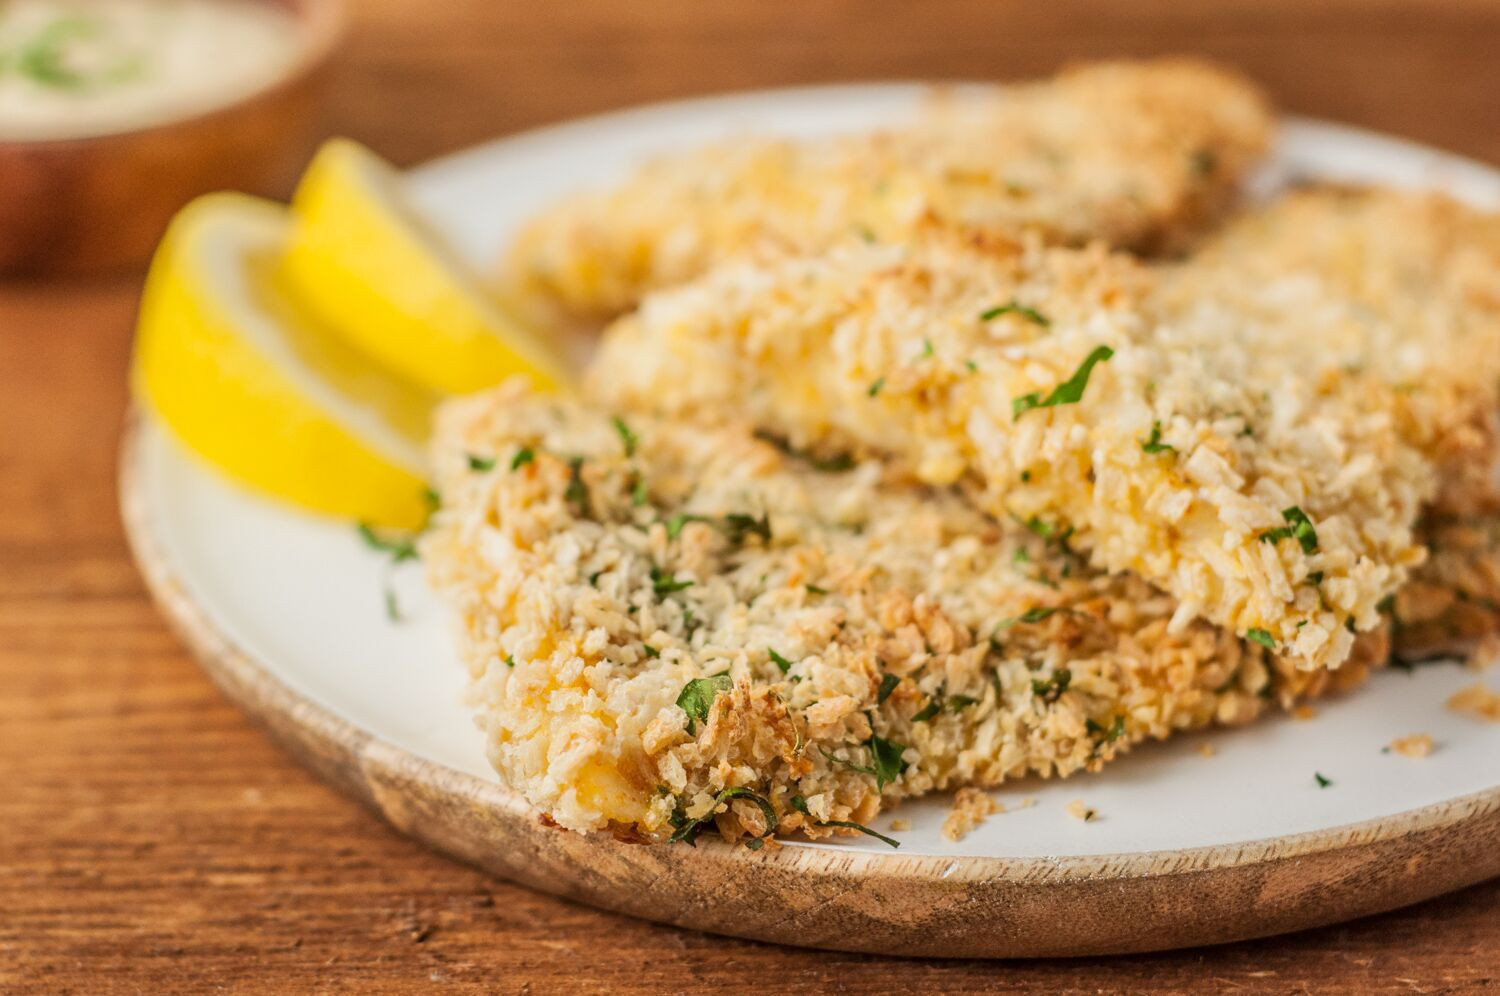 Baked Fish Fillet Recipes
 Baked Panko Crusted Fish Fillets Recipe